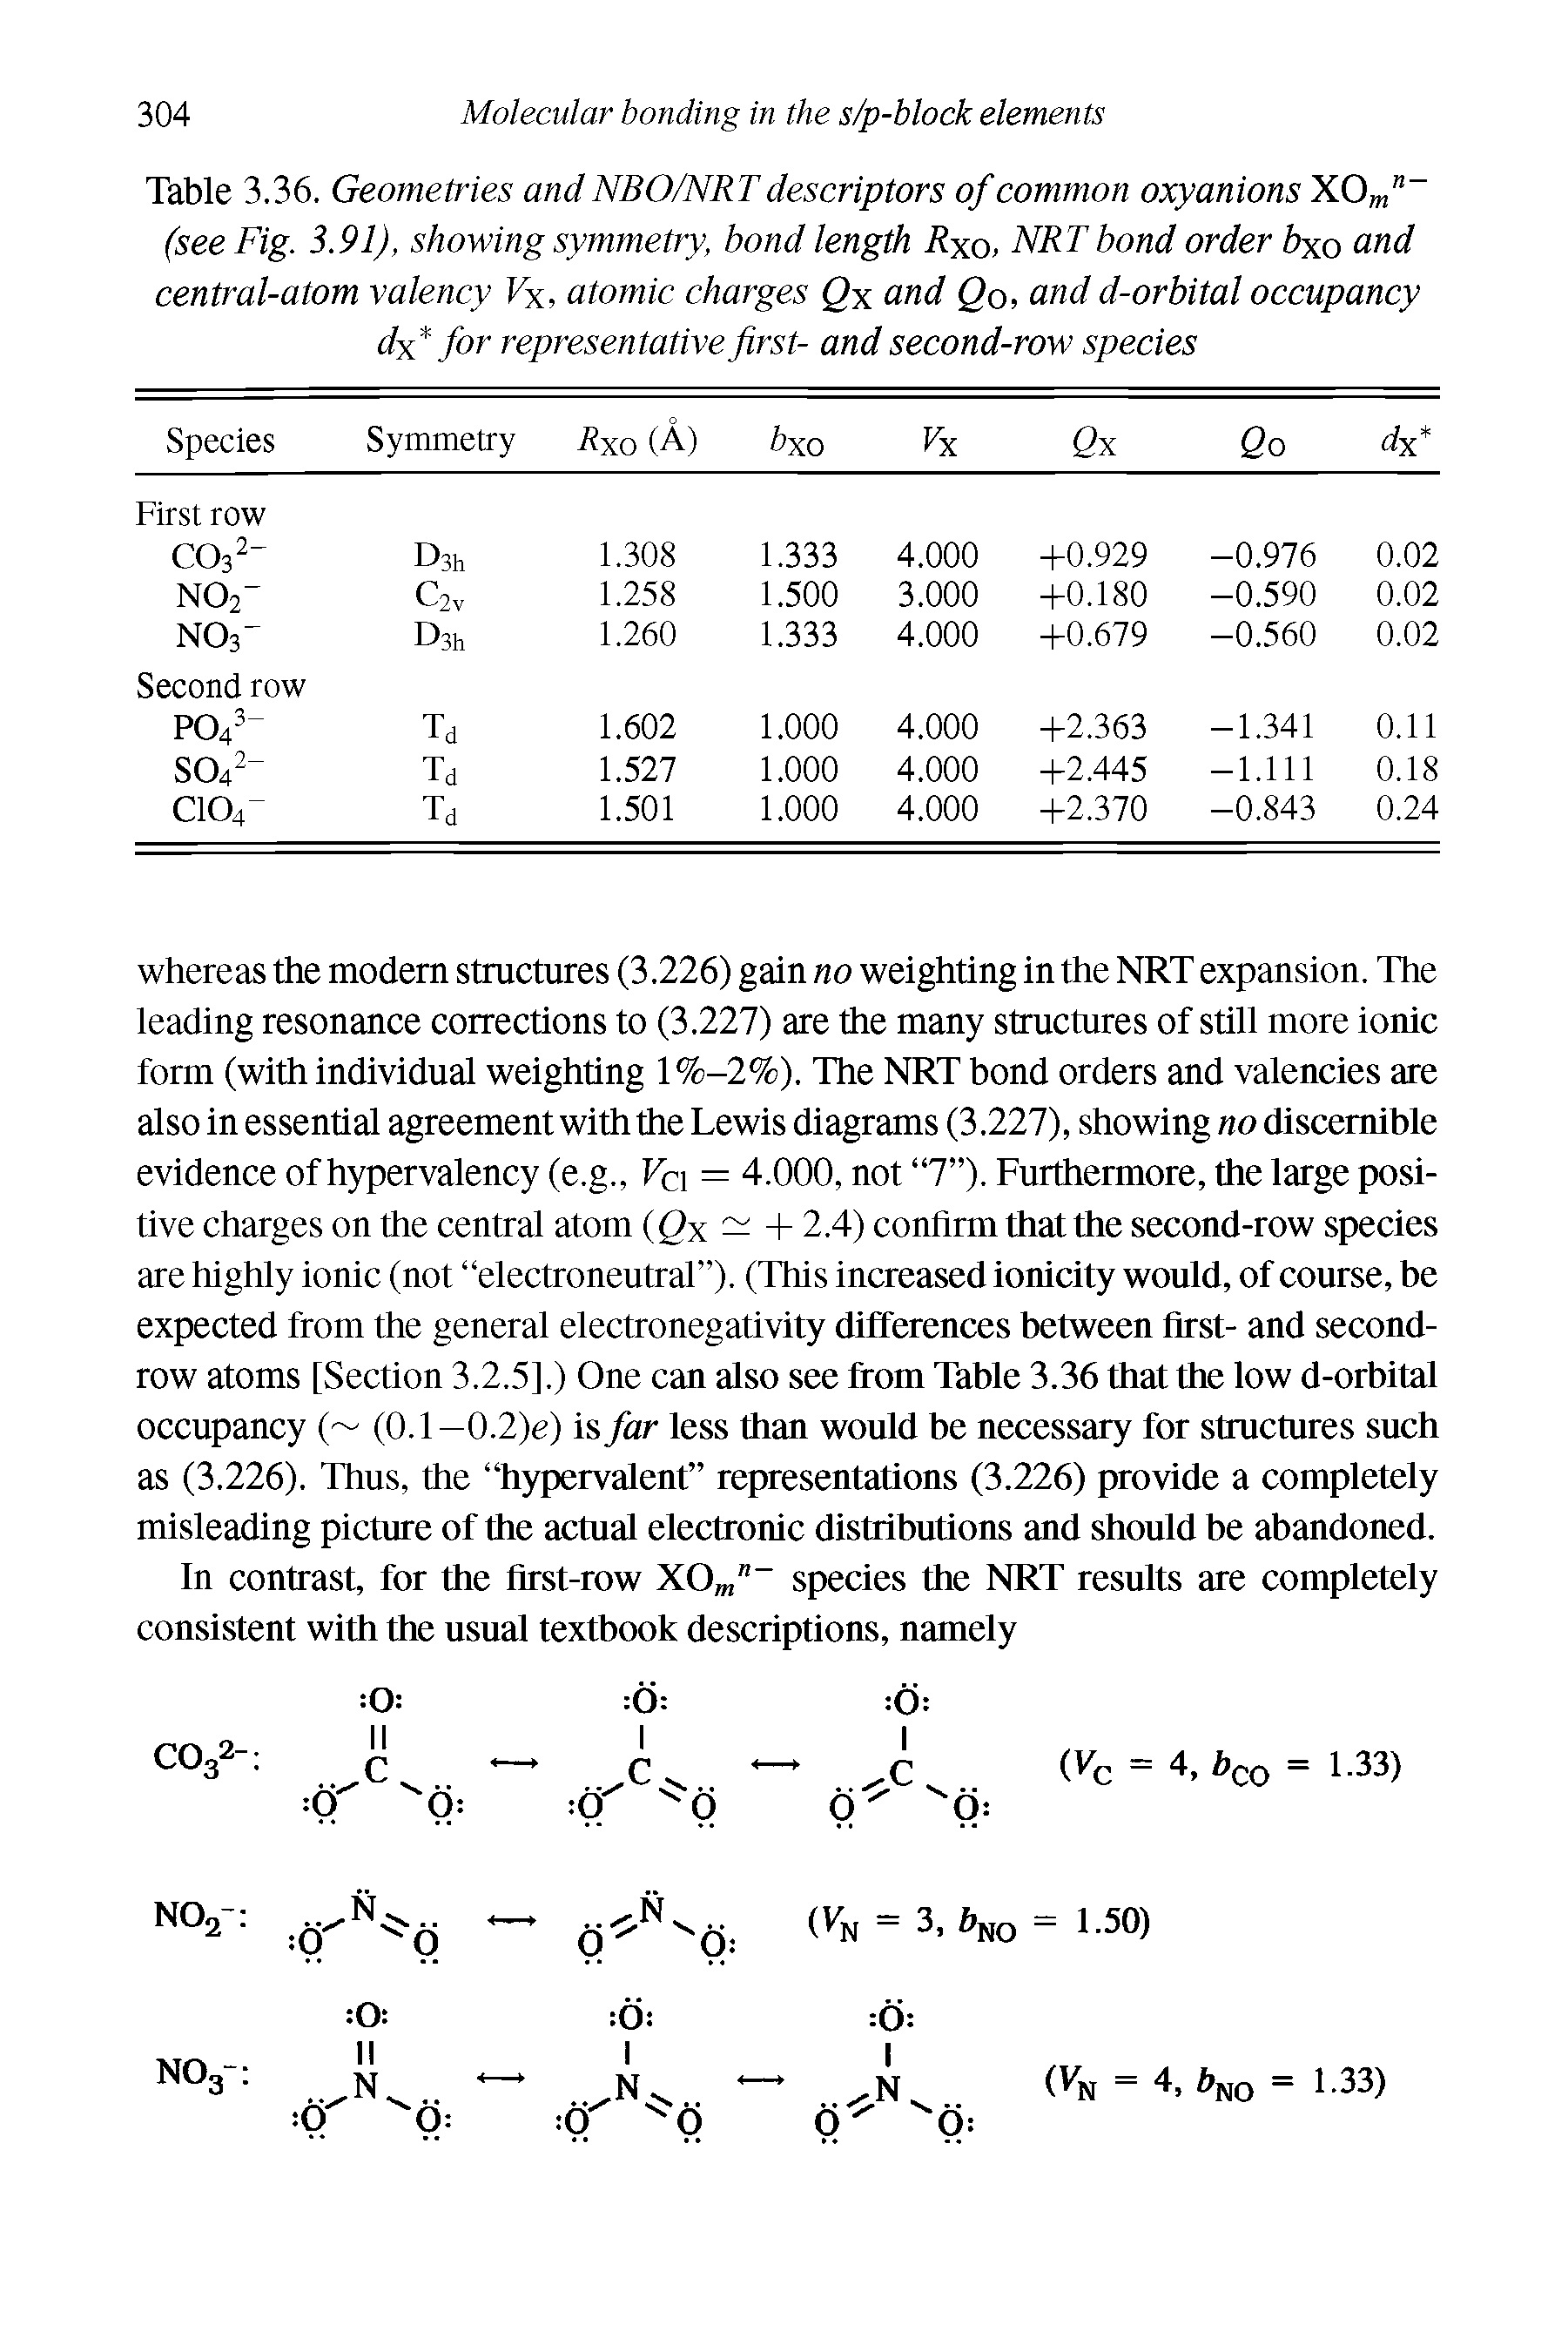 Table 3.36. Geometries and NBO/NRT descriptors of common oxyanions XOmn (see Fig. 3.91), showing symmetry, bond length Rxo, NRT bond order bxo and central-atom valency Vx, atomic charges Qx and Qo, and d-orbital occupancy dx for representative first- and second-row species...